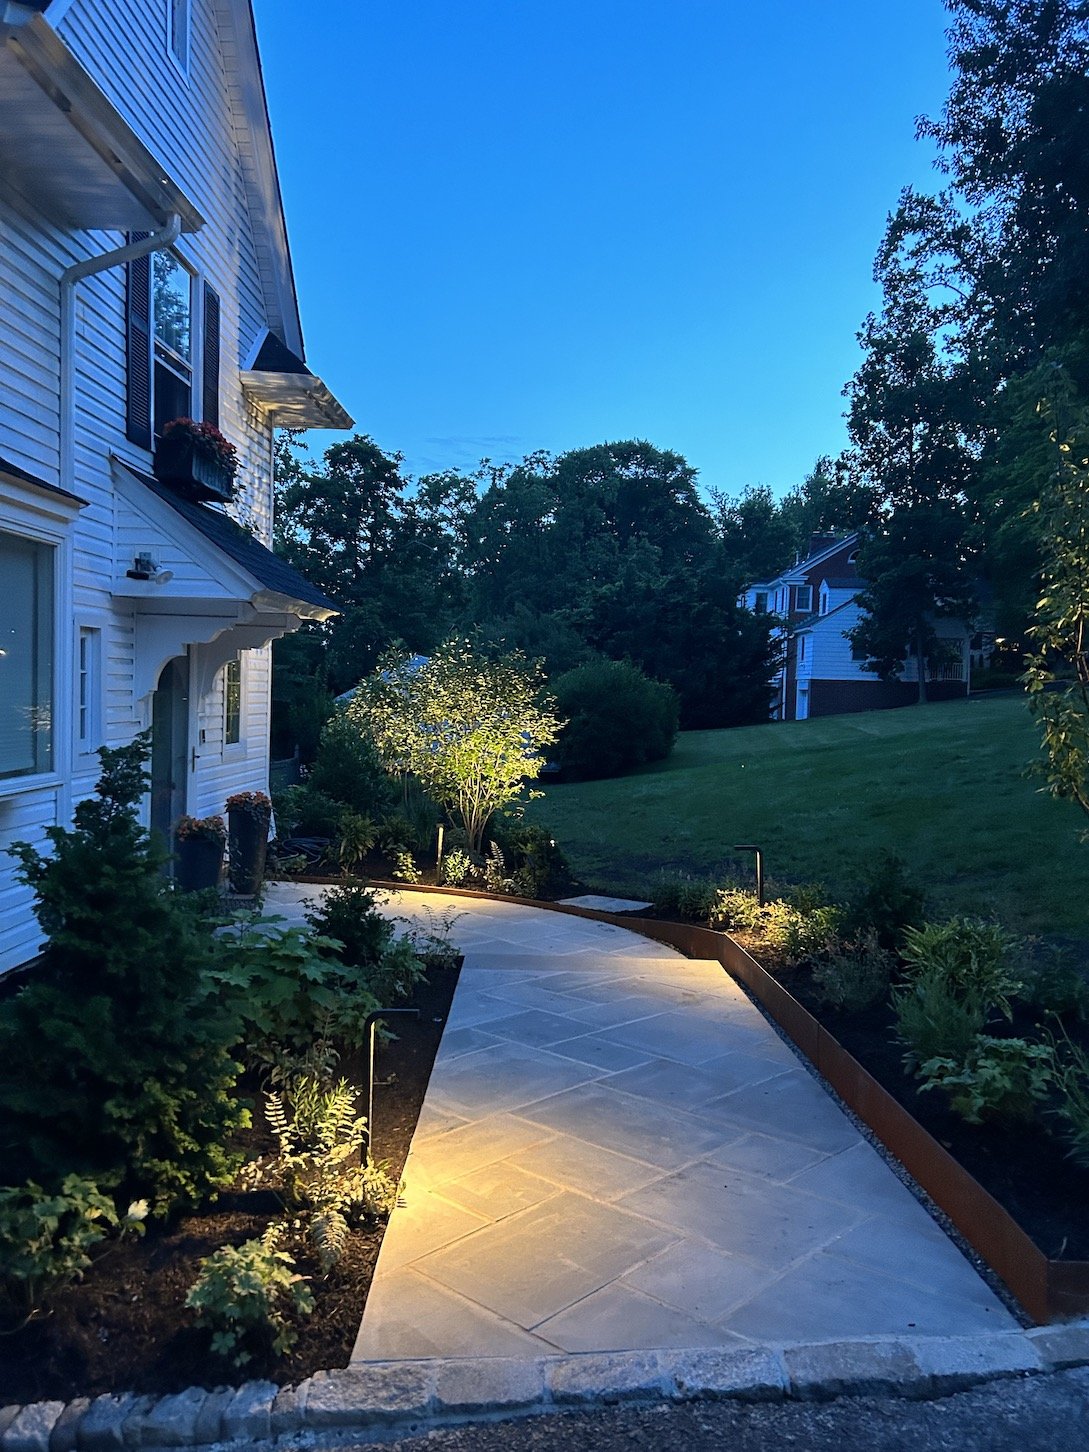 Entryway outdoor lighting to highlight walkway and home entrance with beautiful landscaping.jpg